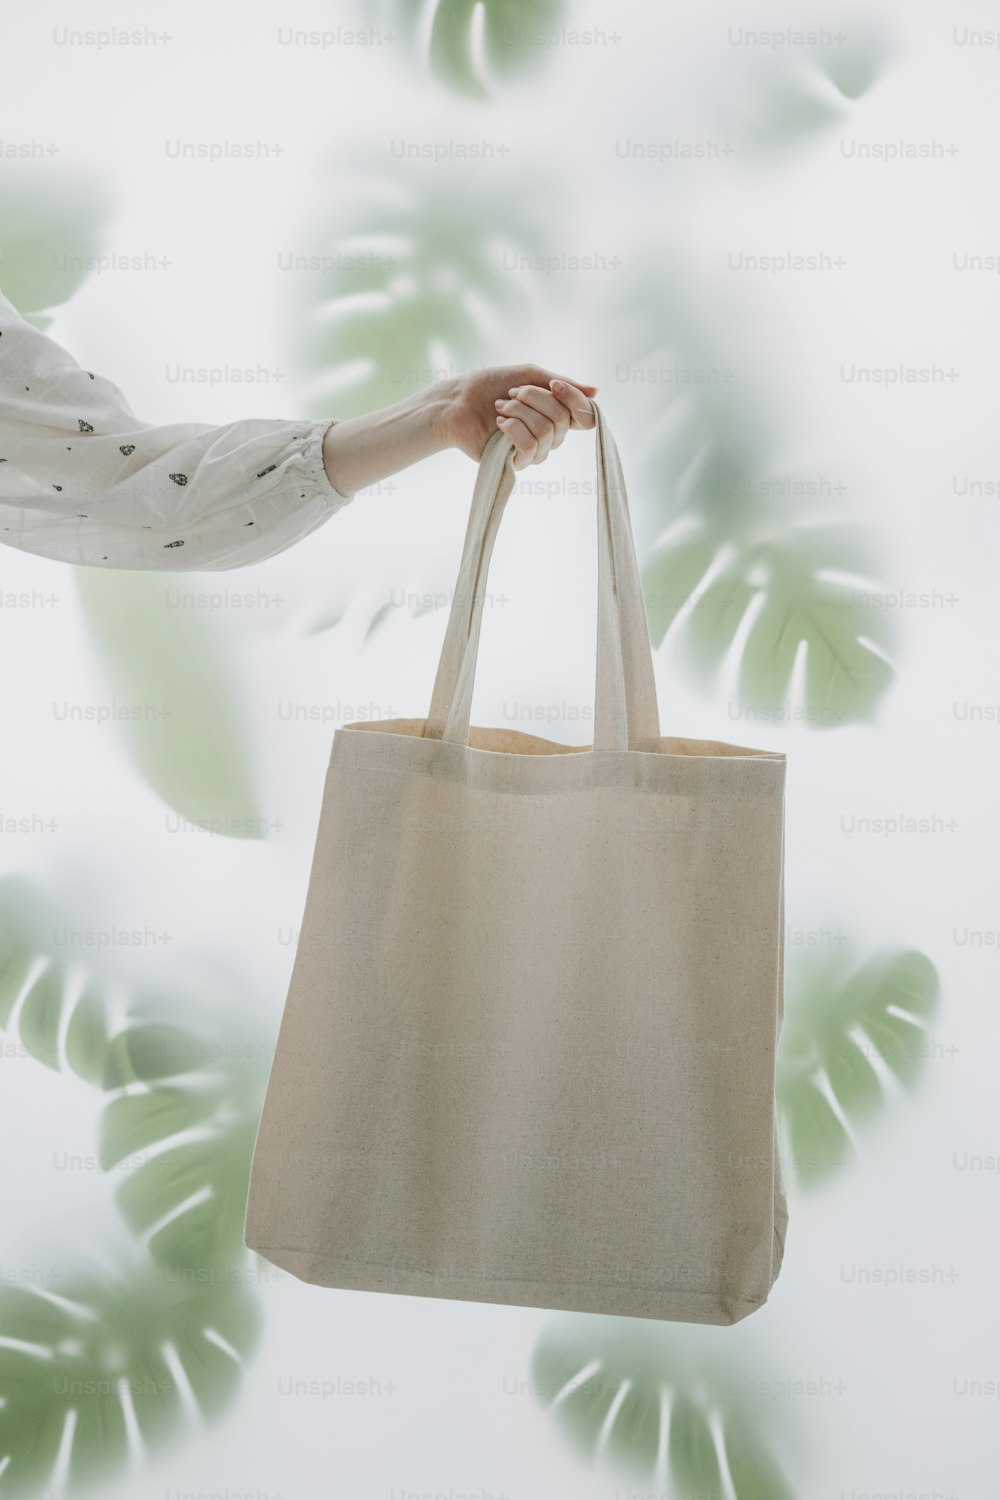 Blank Tote Canvas Bag Mockup On Light Grey Background Stock Photo -  Download Image Now - iStock